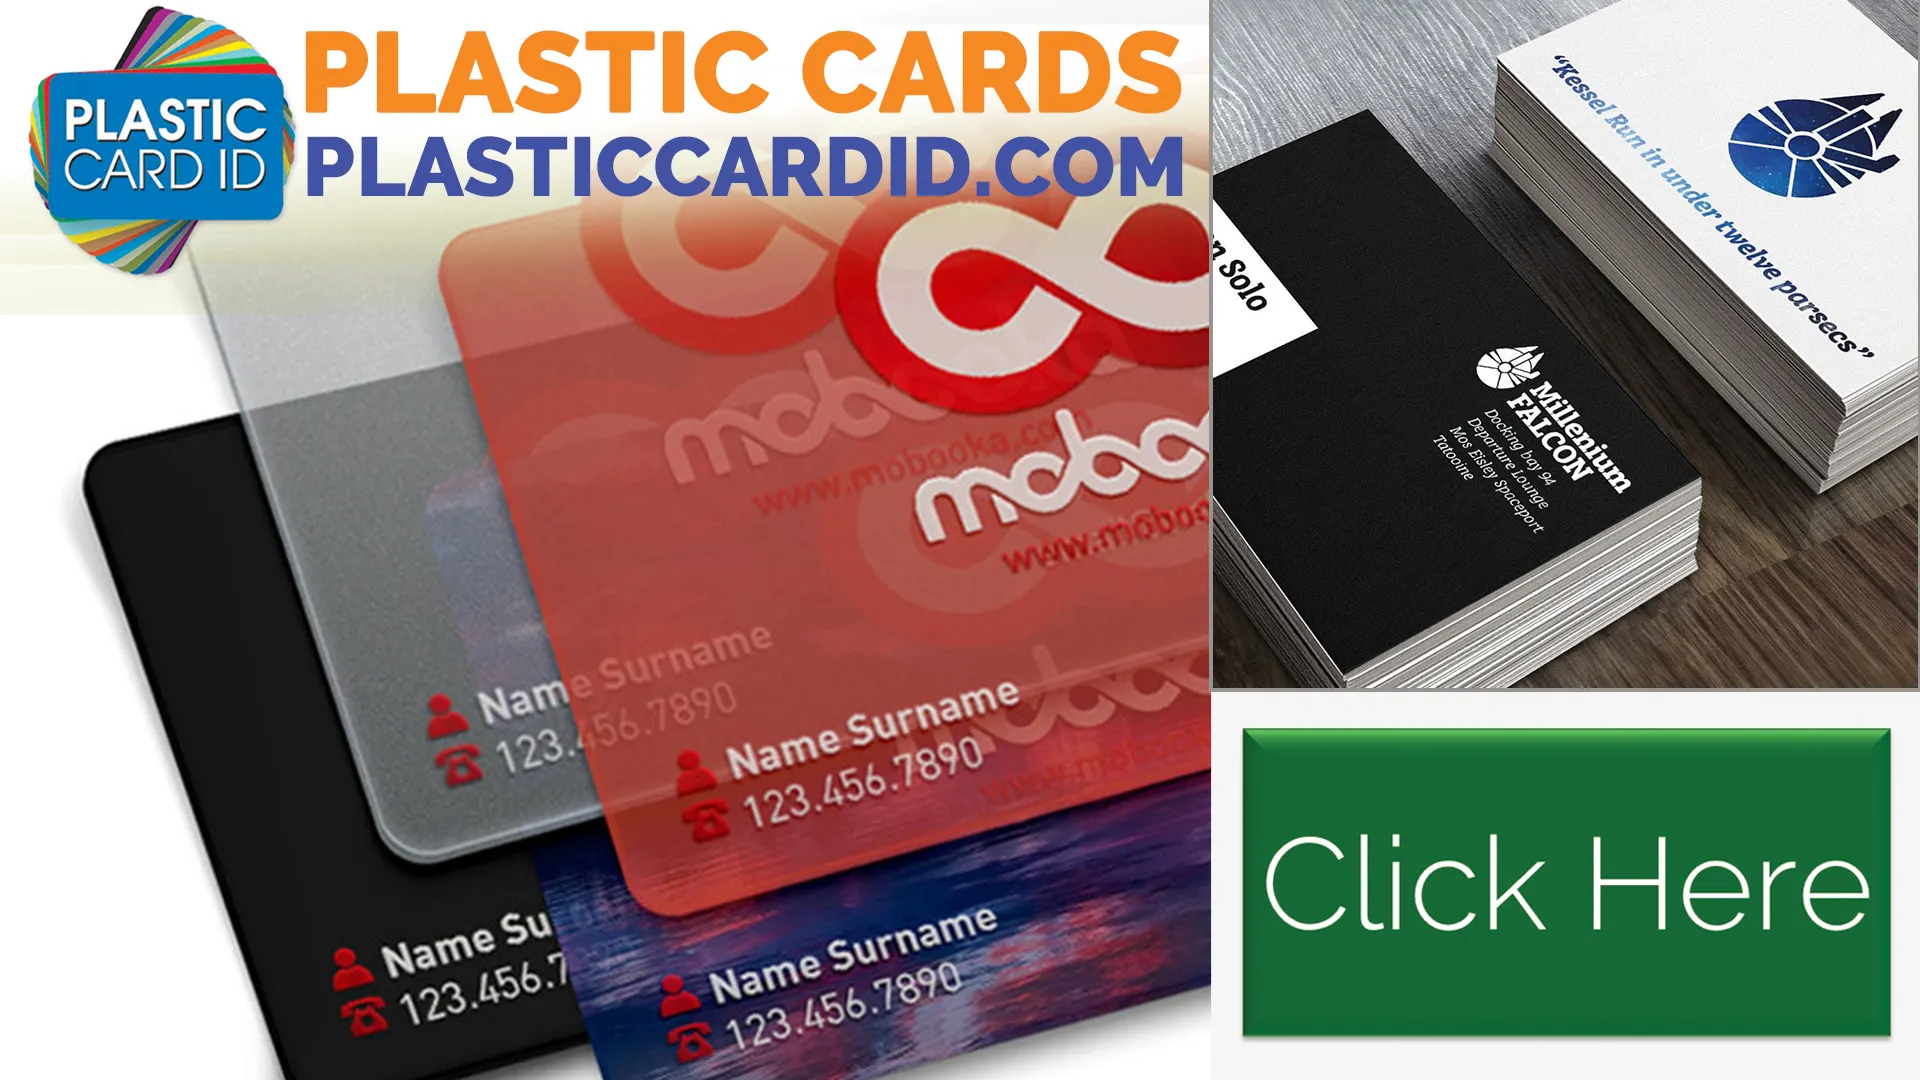 Expand Your Marketing Reach with Innovative Card Features